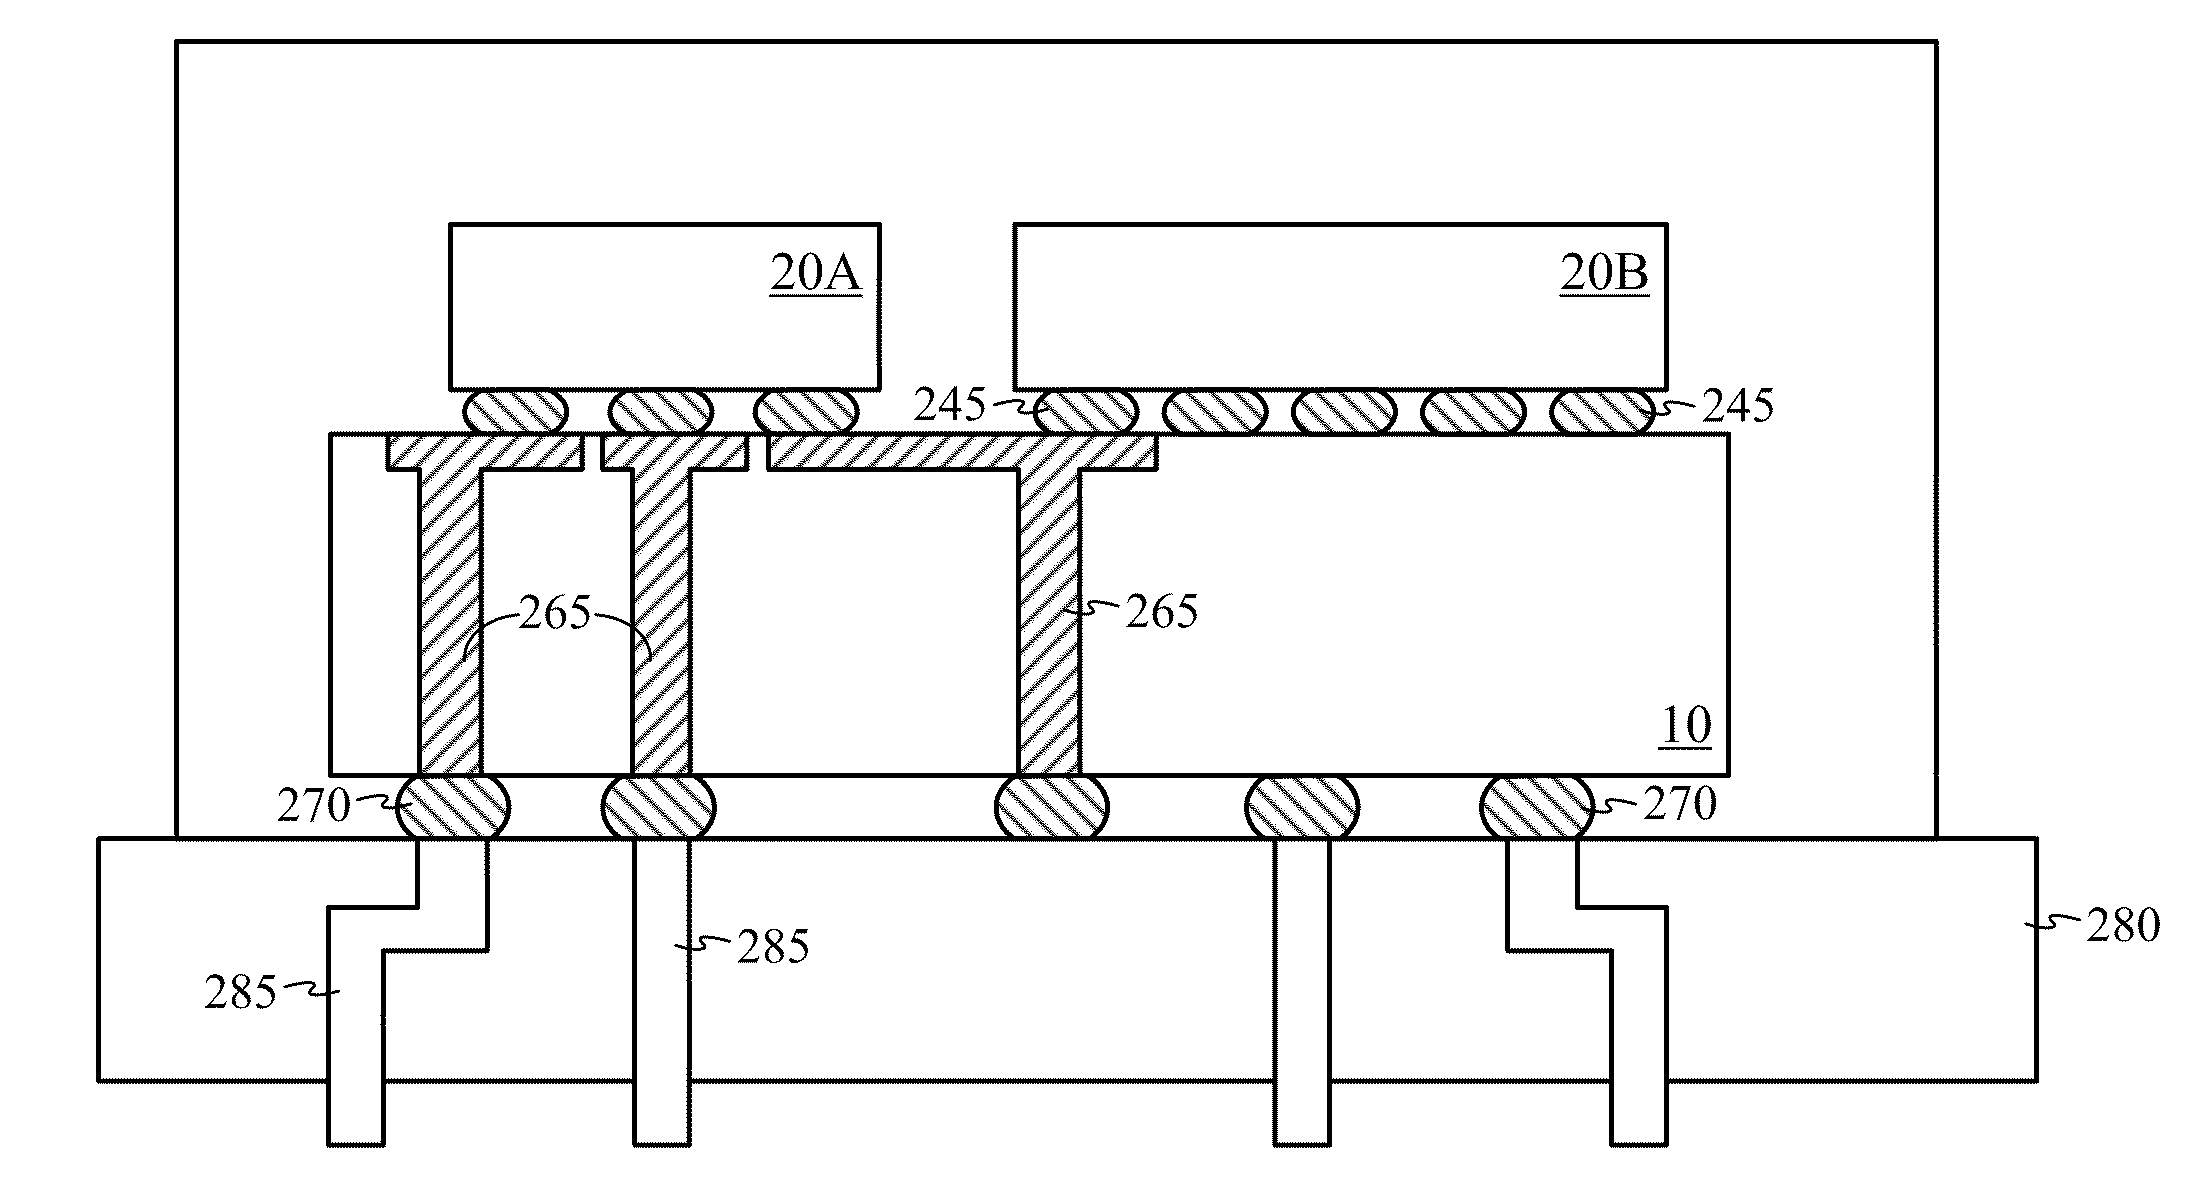 Forming radio frequency integrated circuits